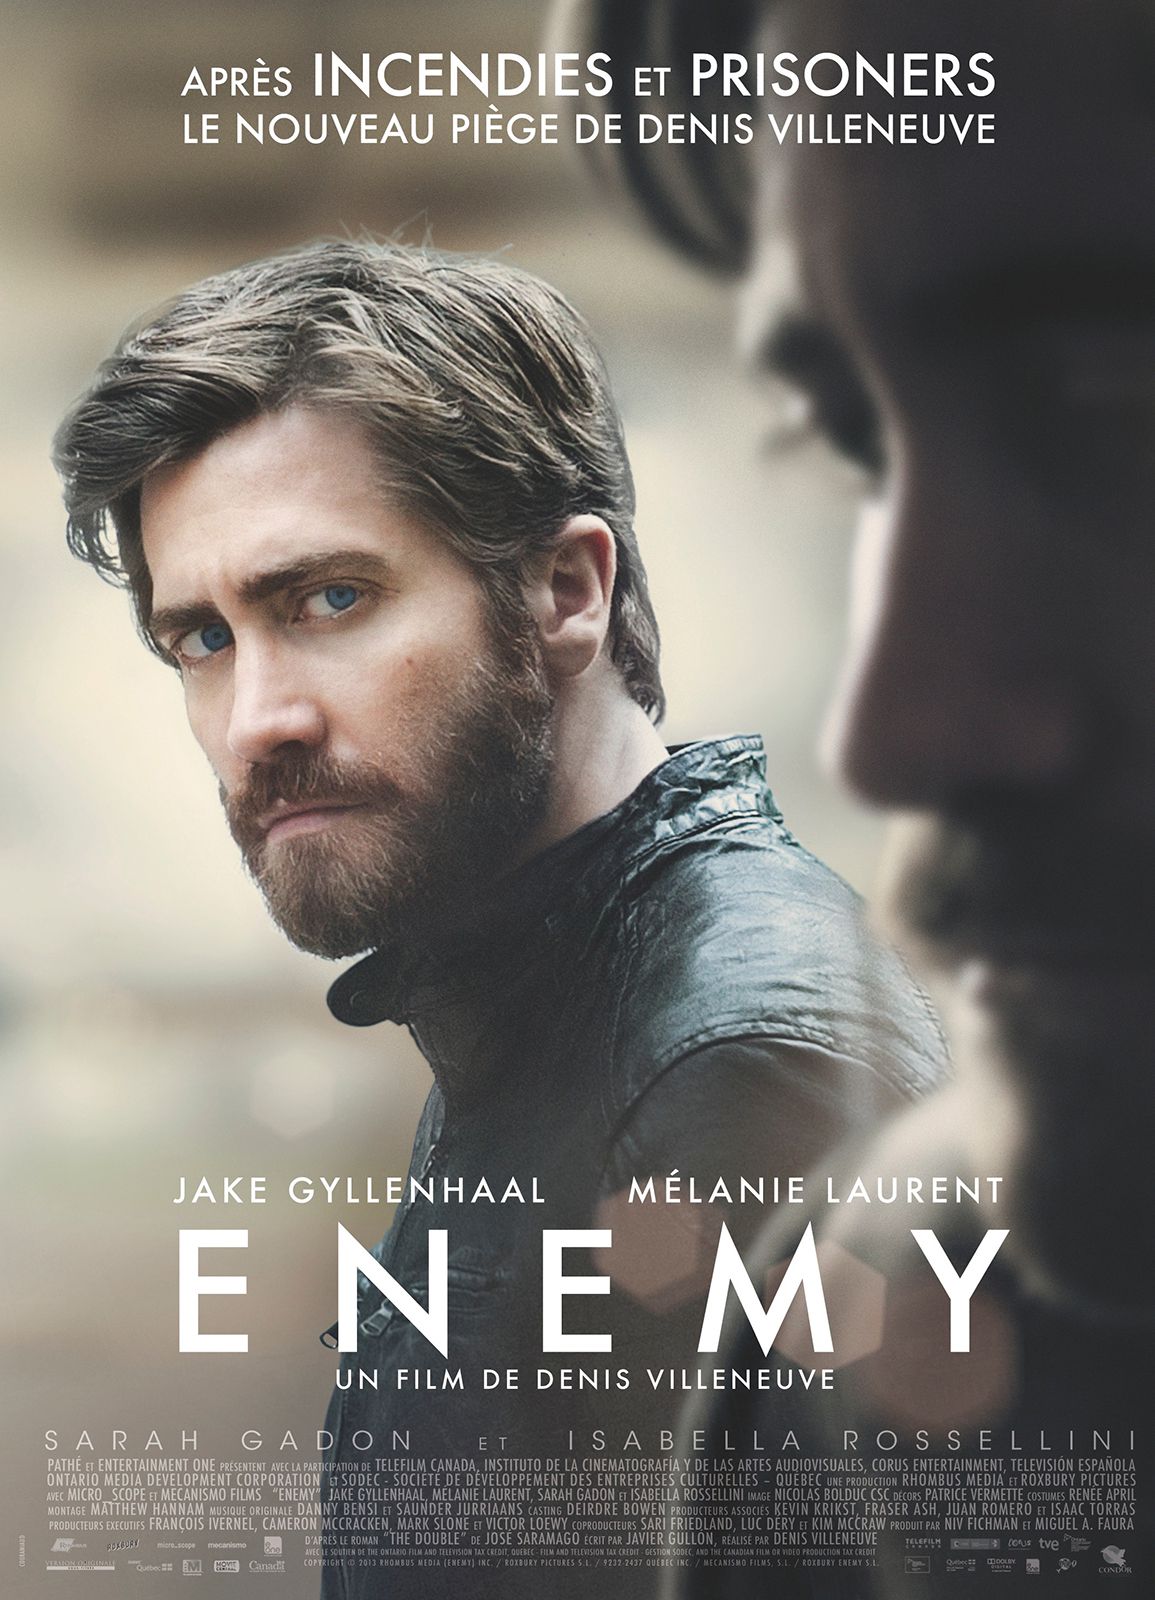 Enemy - Film (2014) streaming VF gratuit complet